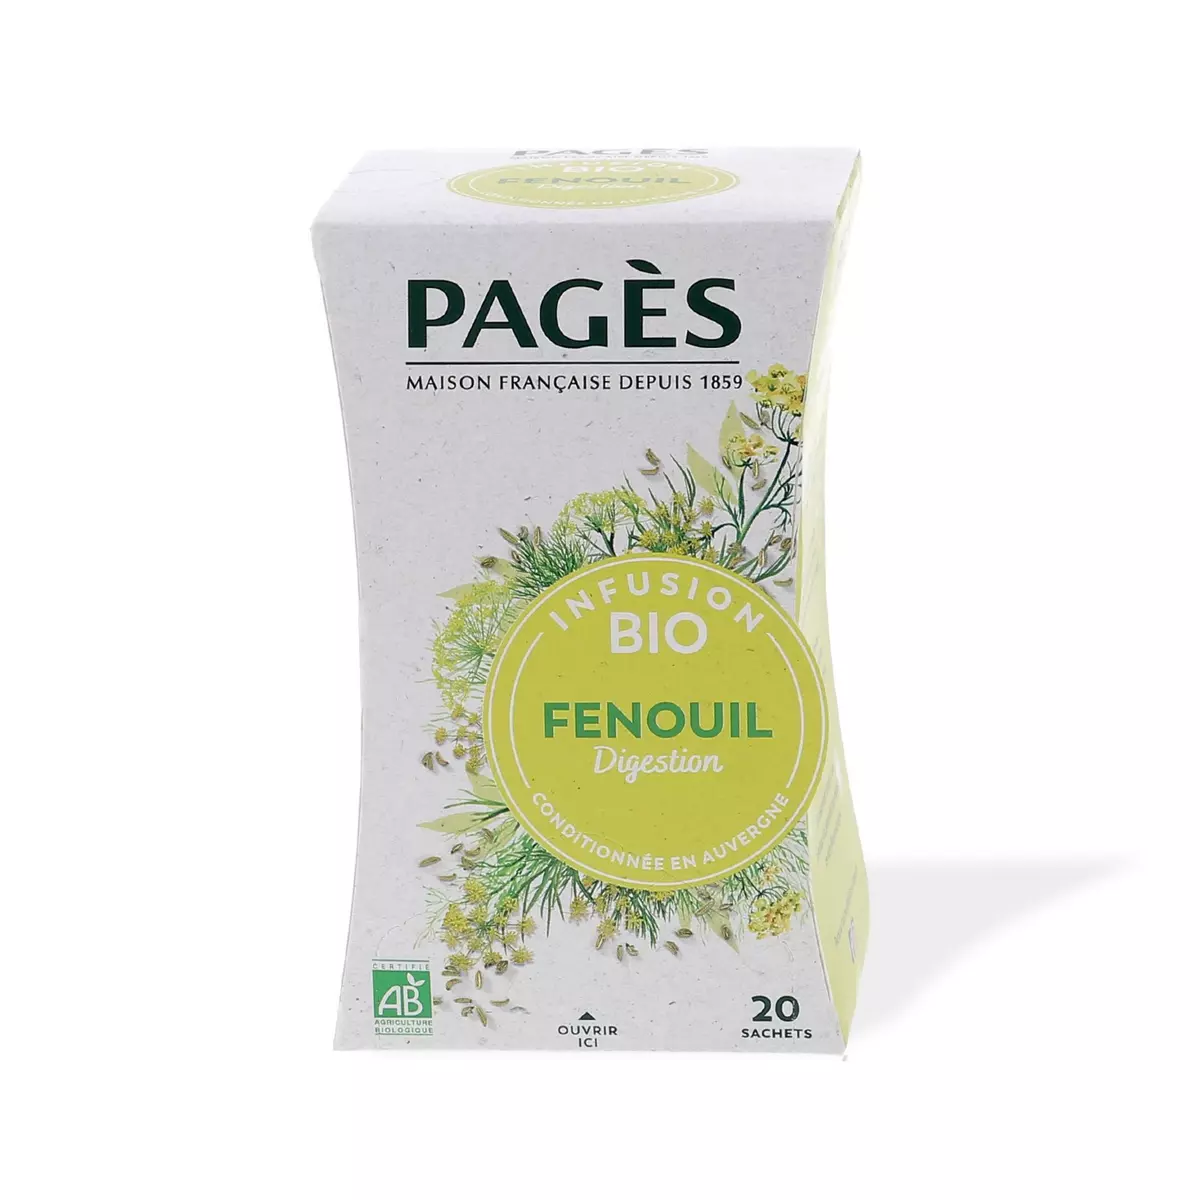 PAGES Infusion digestion bio fenouil 20 sachets 30g